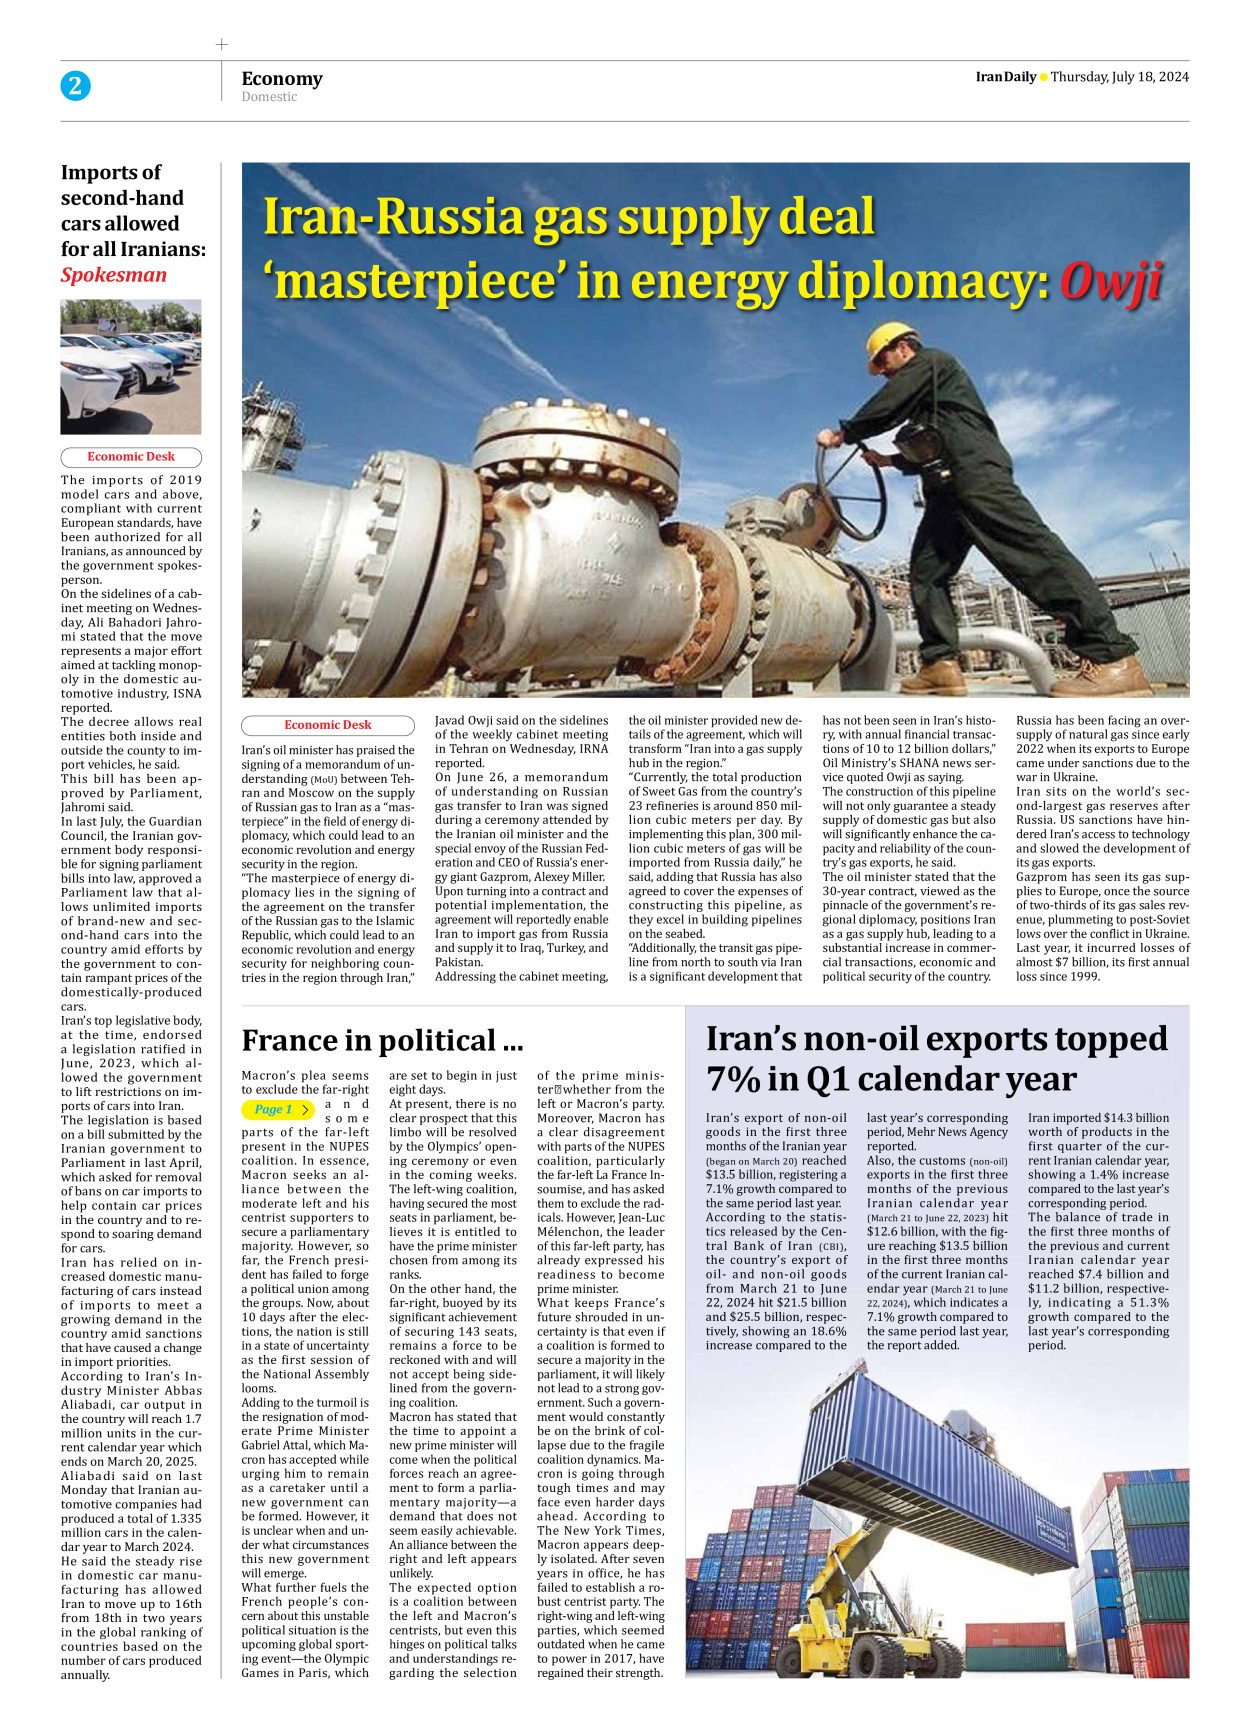 Iran Daily - Number Seven Thousand Six Hundred and Six - 18 July 2024 - Page 2